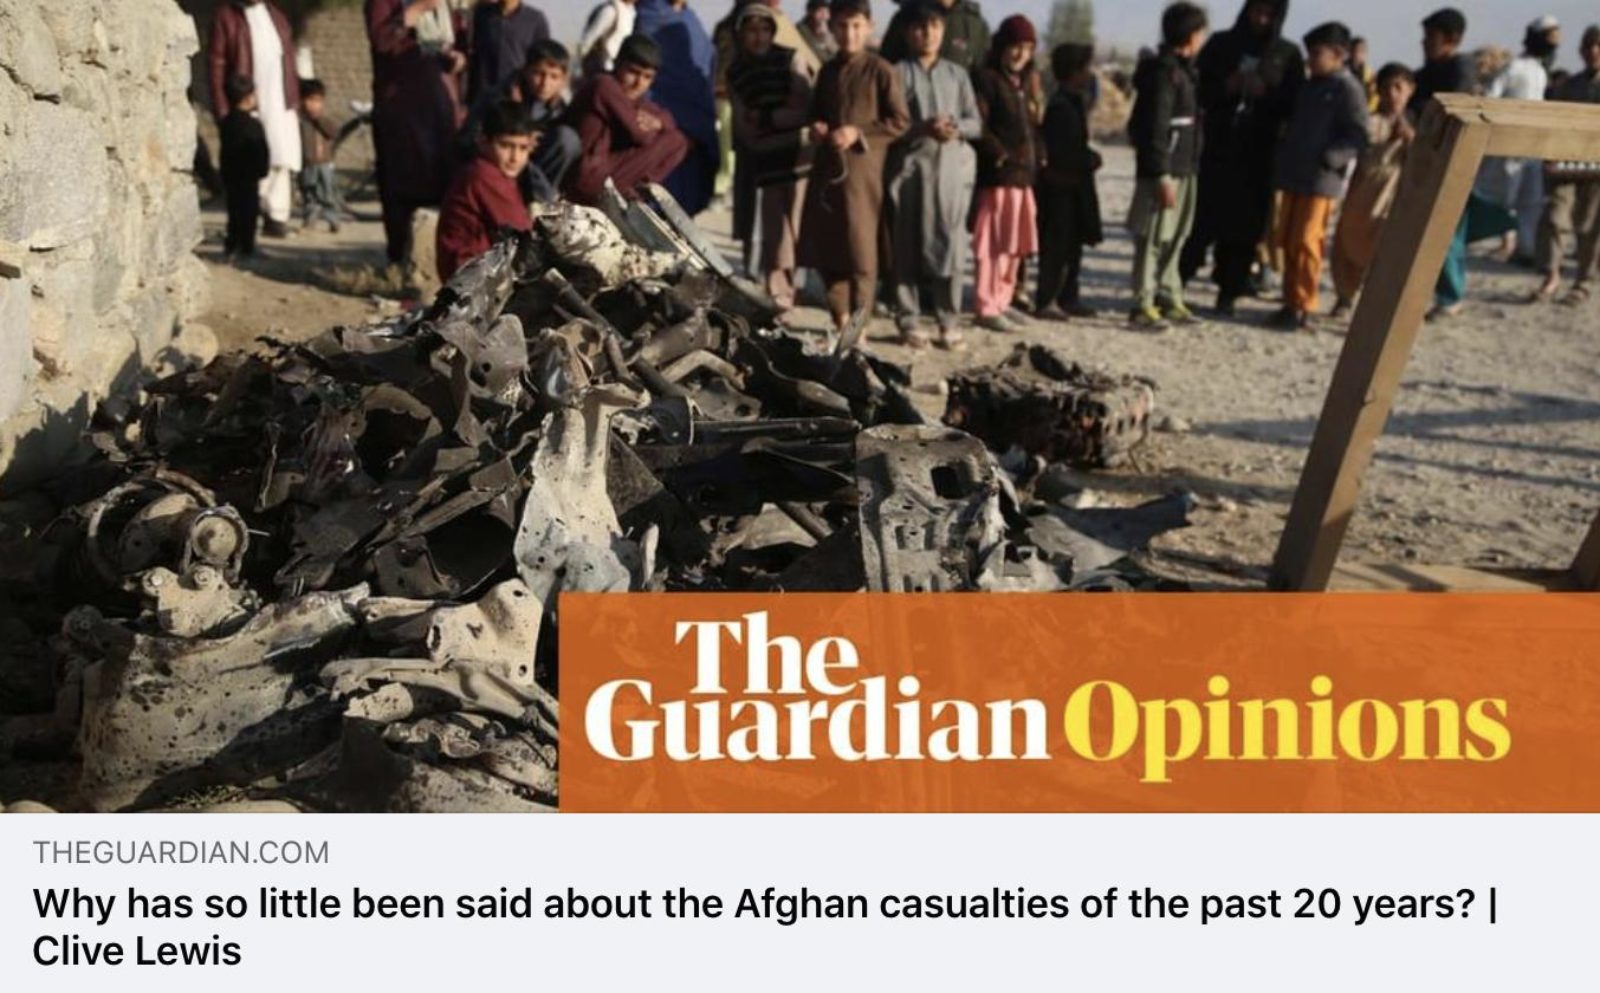 Image of a Guardian article with people standing in the background titled "Why has to little been said about the Afghan casualties of the past 20 years? | Clive Lewis"